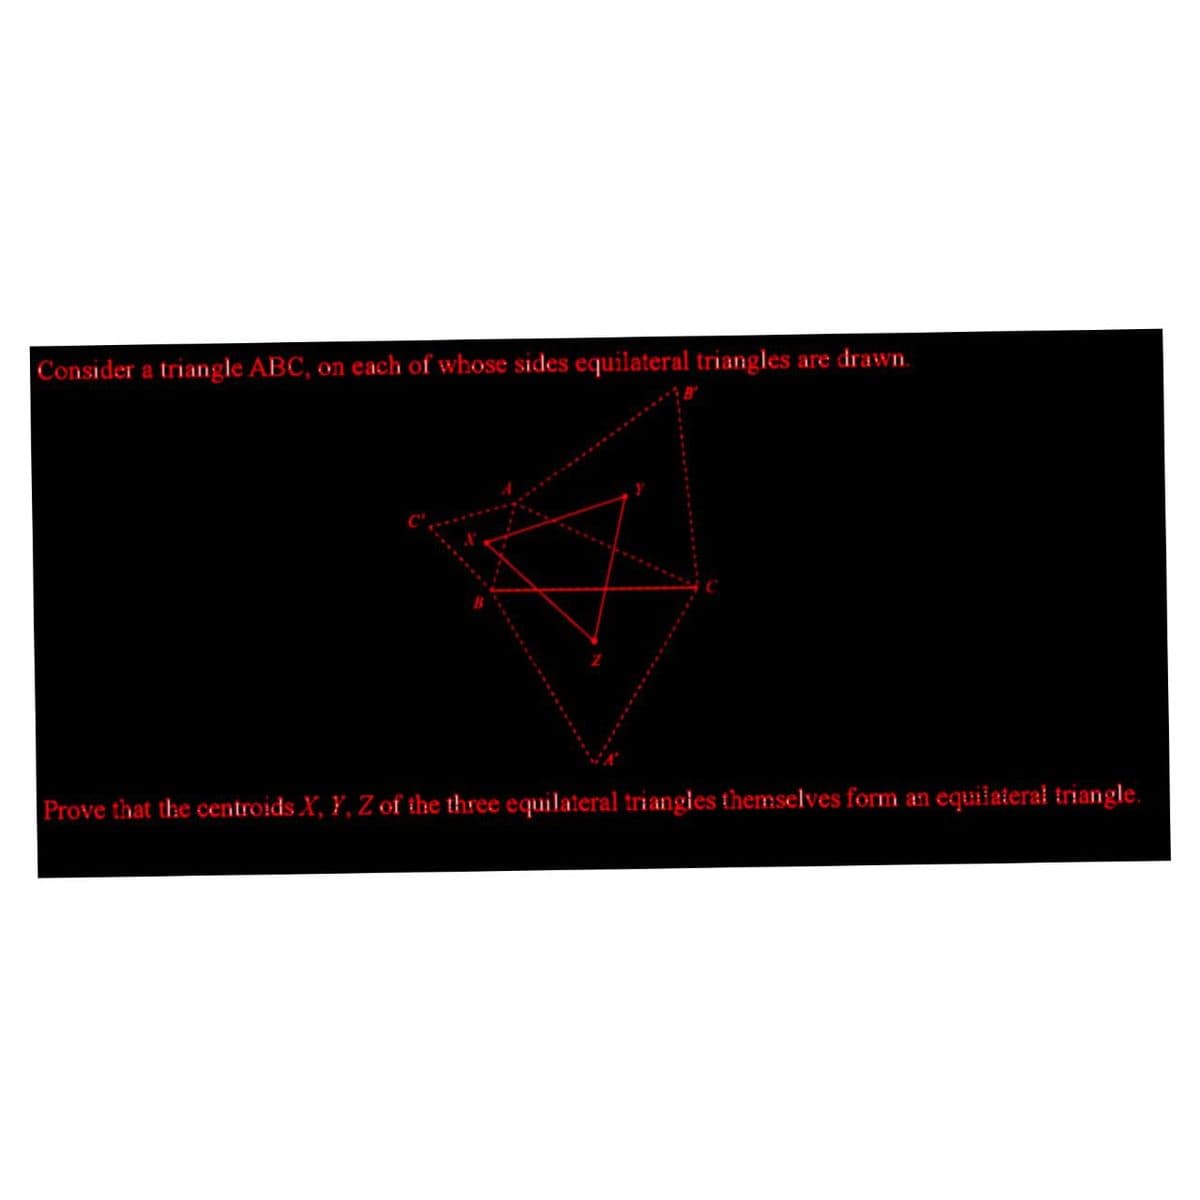 Consider a triangle ABC, on each of whose sides equilateral triangles are drawn.
Prove that the centroids X, Y, Z of the three equilateral triangles themselves form an equilateral triangle.